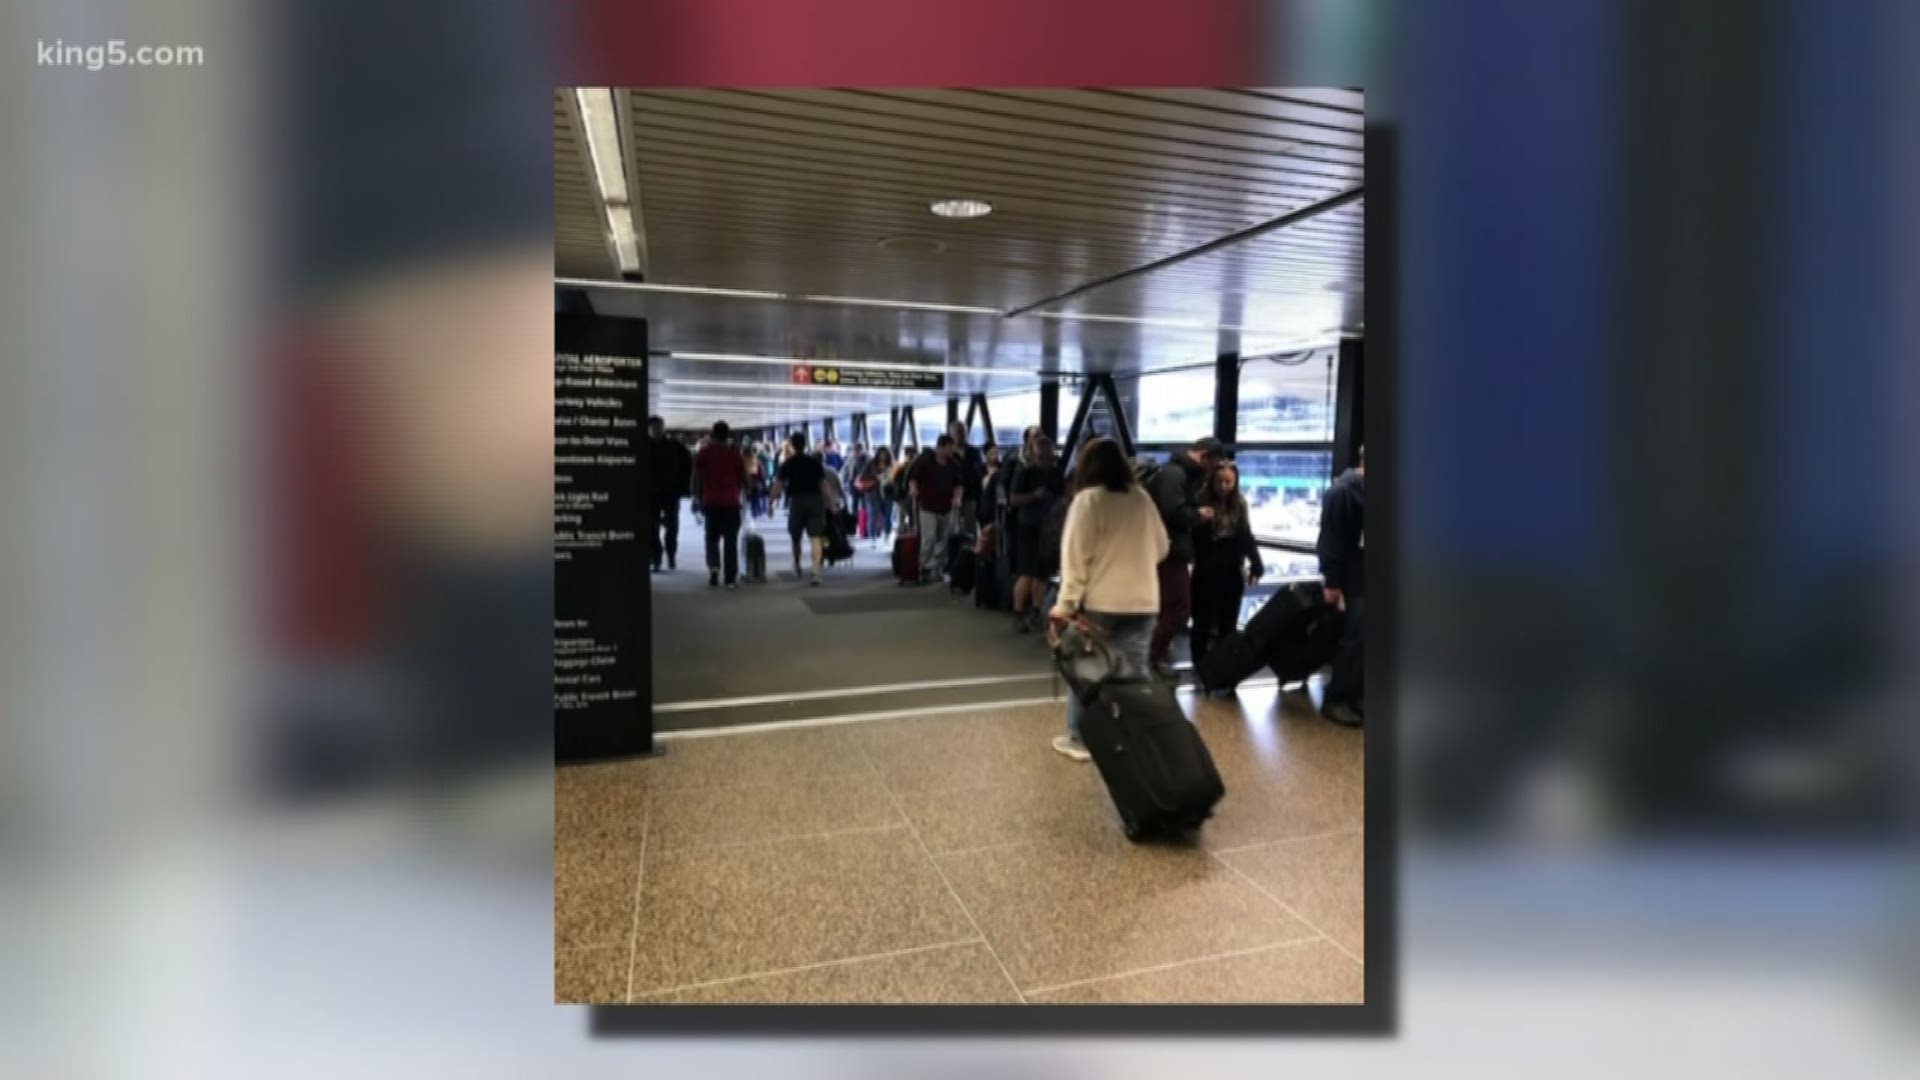 The start to the busy summer travel season is upon us, and officials with Sea-Tac Airport are worried long lines could get worse. KING 5's Michael Crowe has the details.